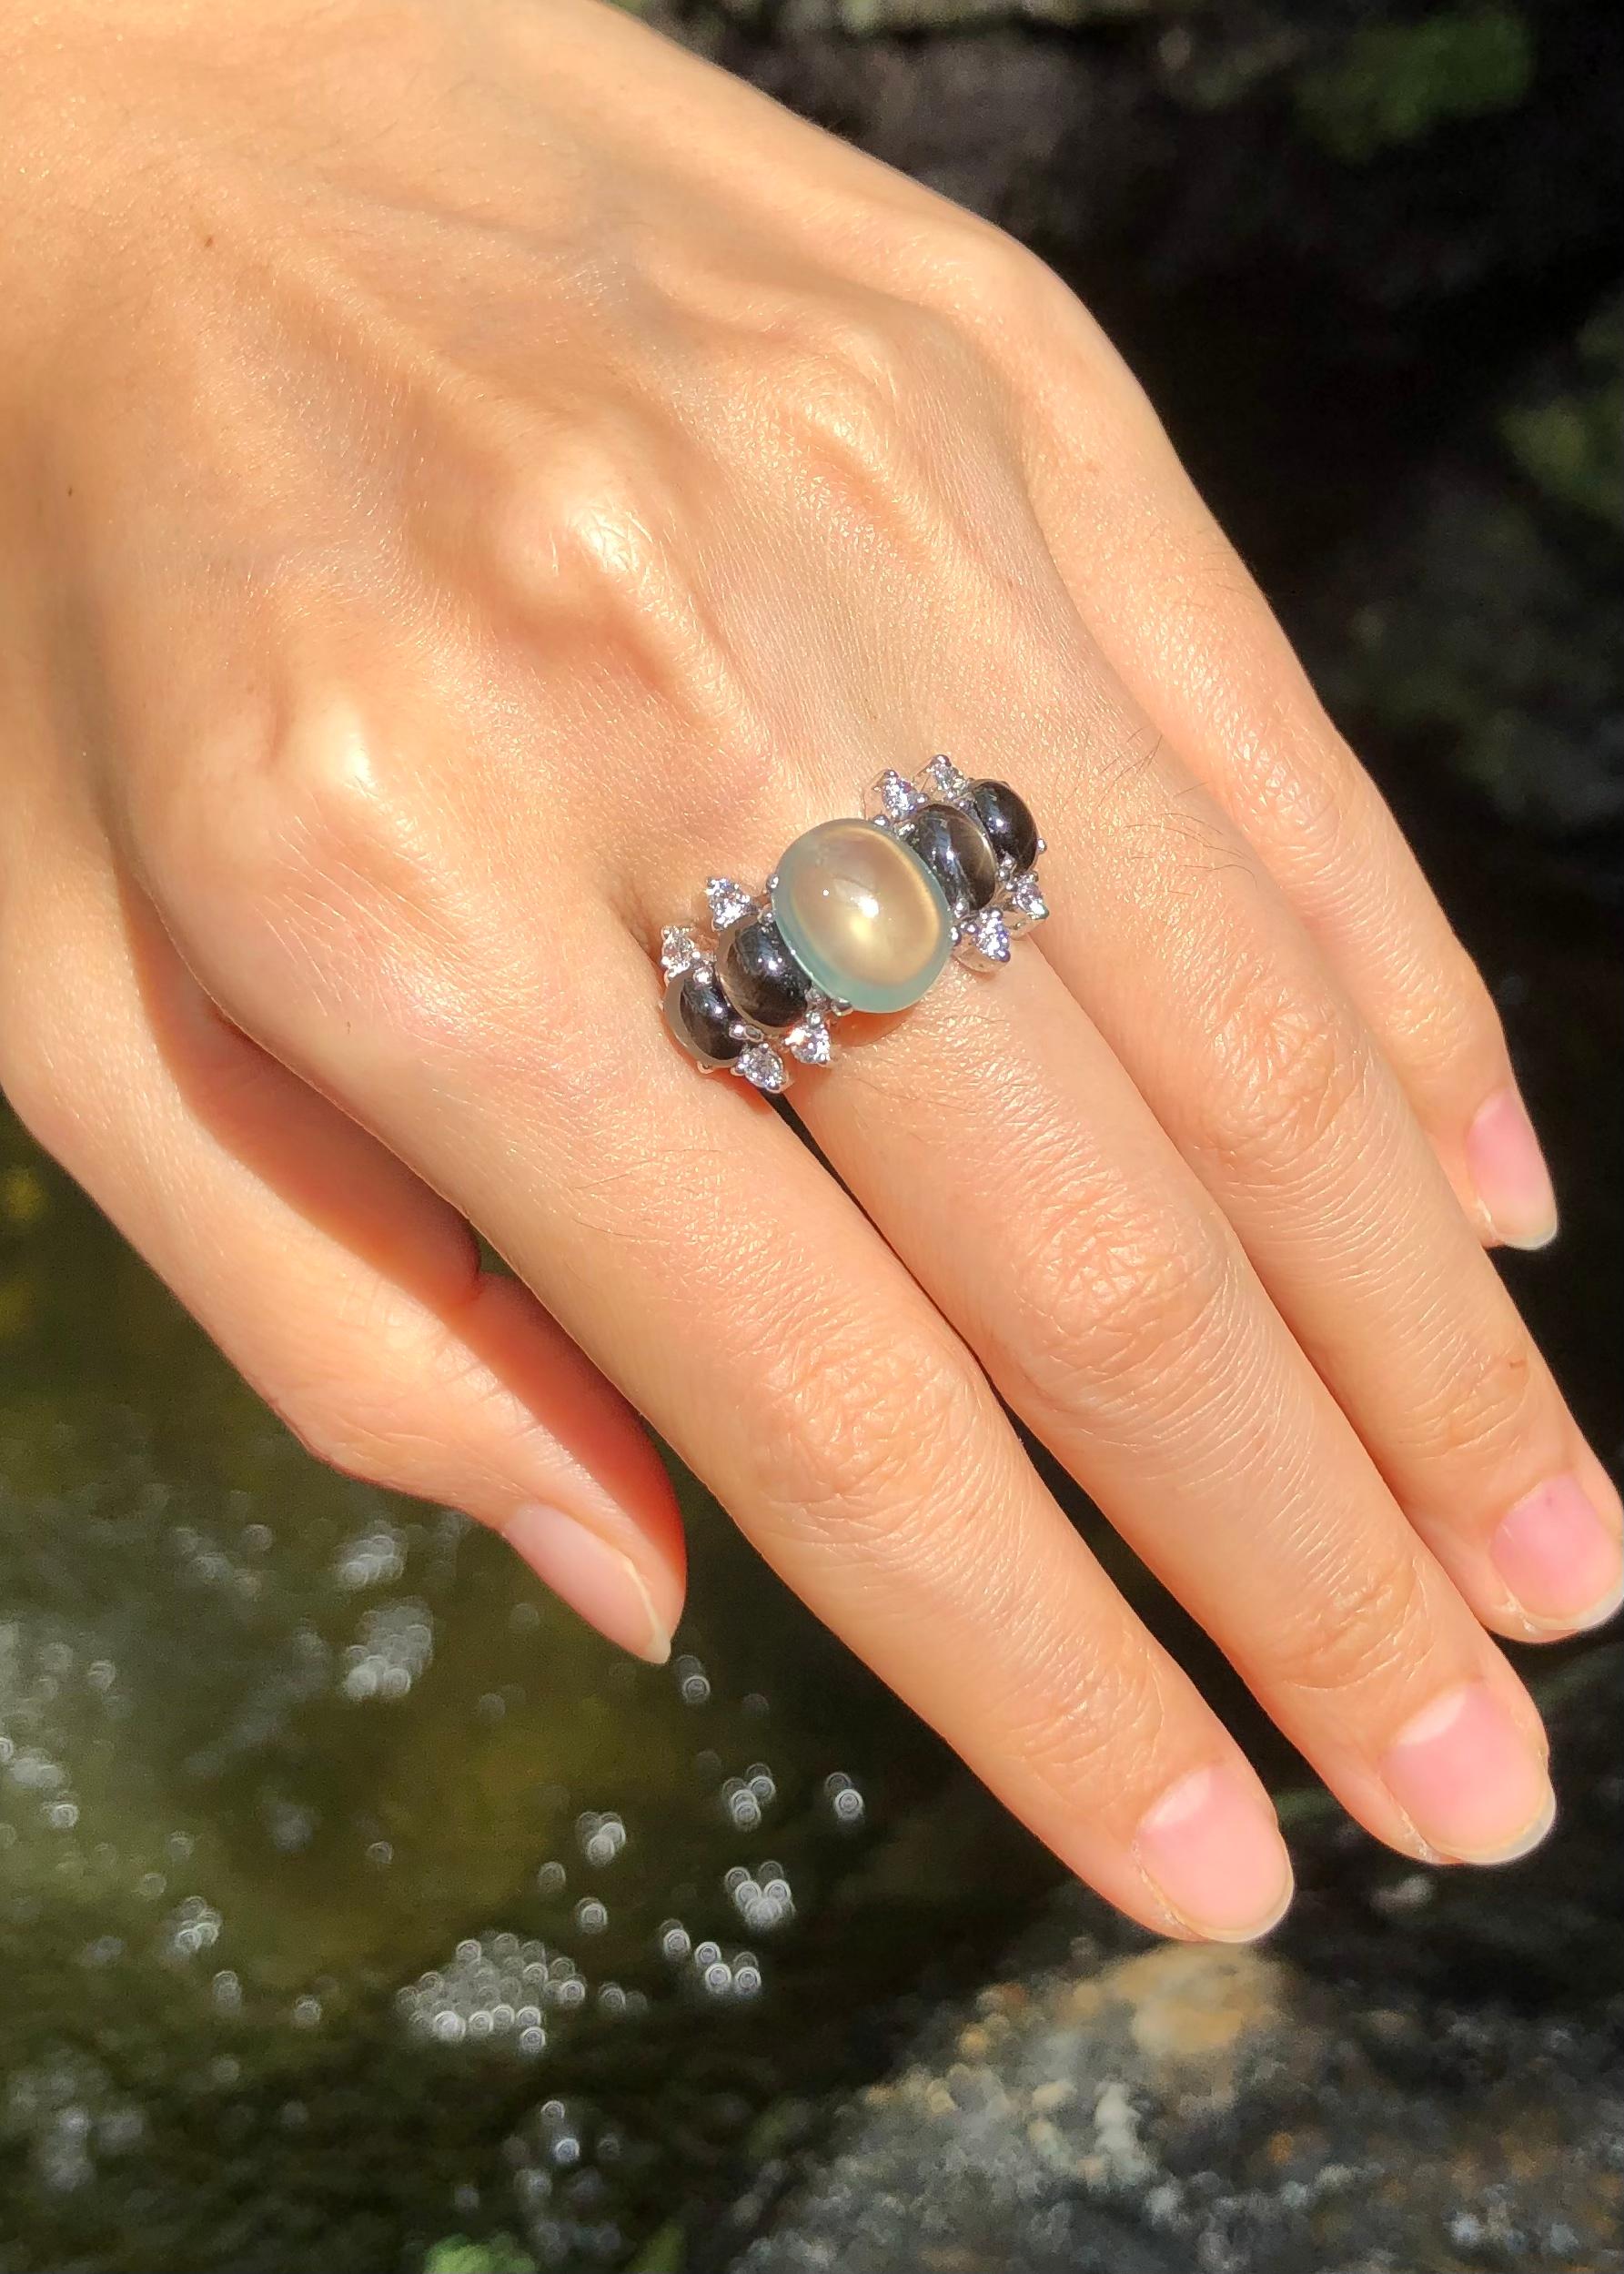 Prehnite, Black Star Sapphire and Cubic Zirconia Ring set in Silver Settings

Width:  2.3 cm 
Length: 1.2 cm
Ring Size: 57
Total Weight: 7.53 grams

*Please note that the silver setting is plated with rhodium to promote shine and help prevent